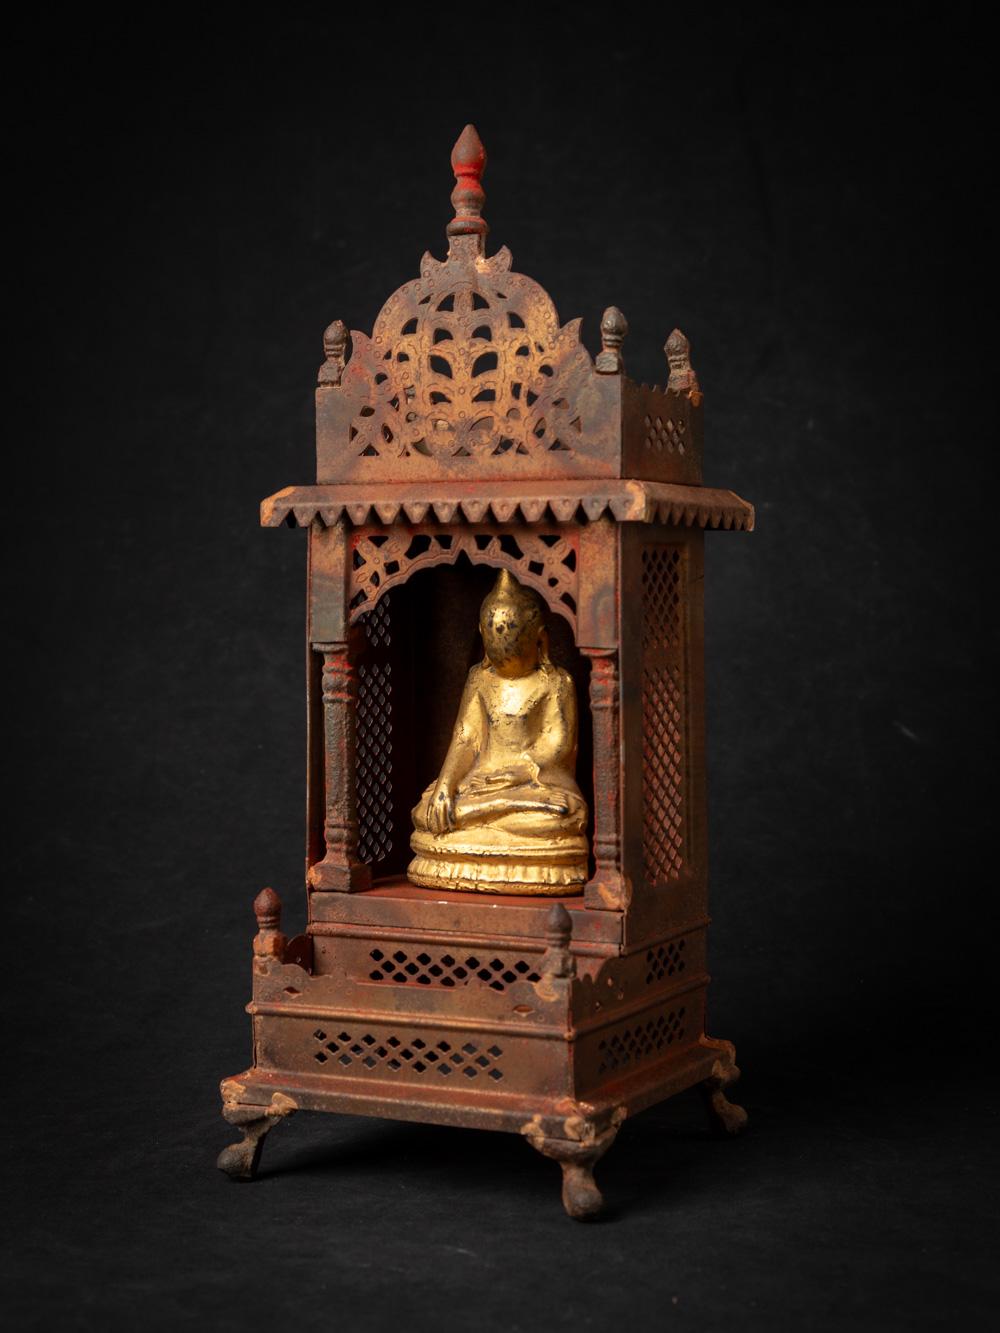 Old metal temple with antique wooden Buddha statue
Material: Metal
37 cm high
14,7 cm wide and 14 cm deep
The temple is originating from Nepal
The gilded Buddha is from Burma and is dating from the 19th century
Weight: 1,19 kgs
Originating from